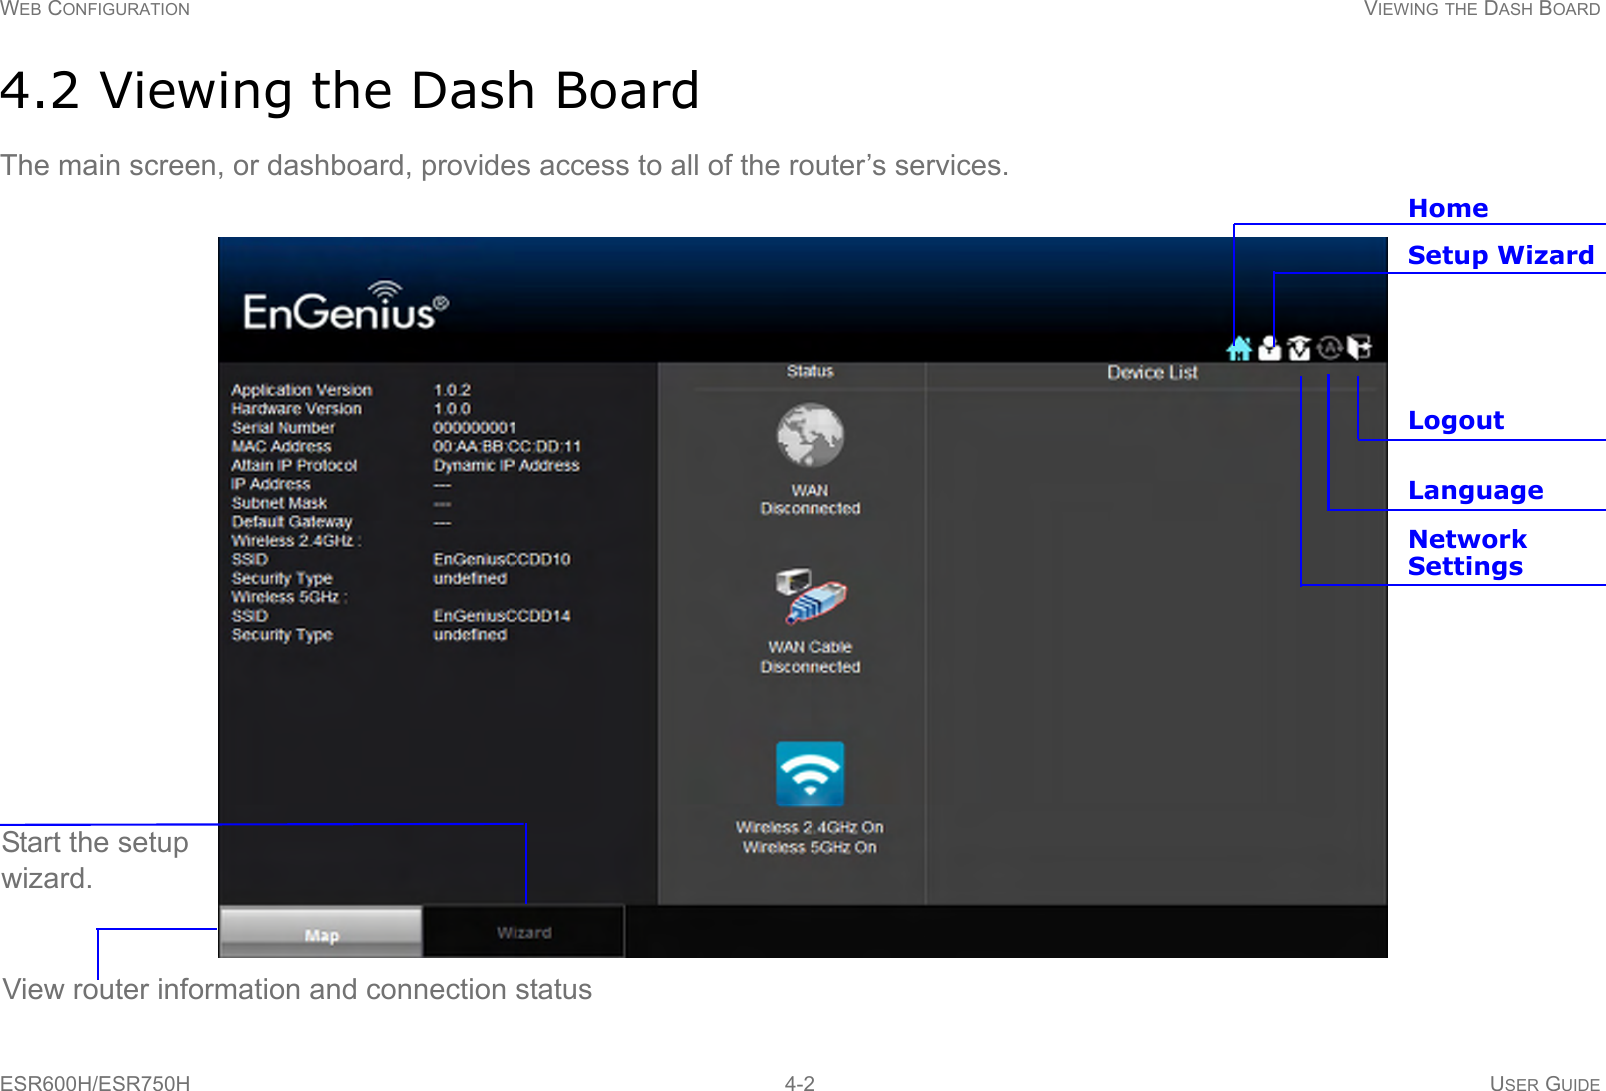 WEB CONFIGURATION VIEWING THE DASH BOARDESR600H/ESR750H 4-2 USER GUIDE4.2 Viewing the Dash BoardThe main screen, or dashboard, provides access to all of the router’s services. HomeSetup WizardNetworkSettingsLogoutView router information and connection statusStart the setup wizard.Language